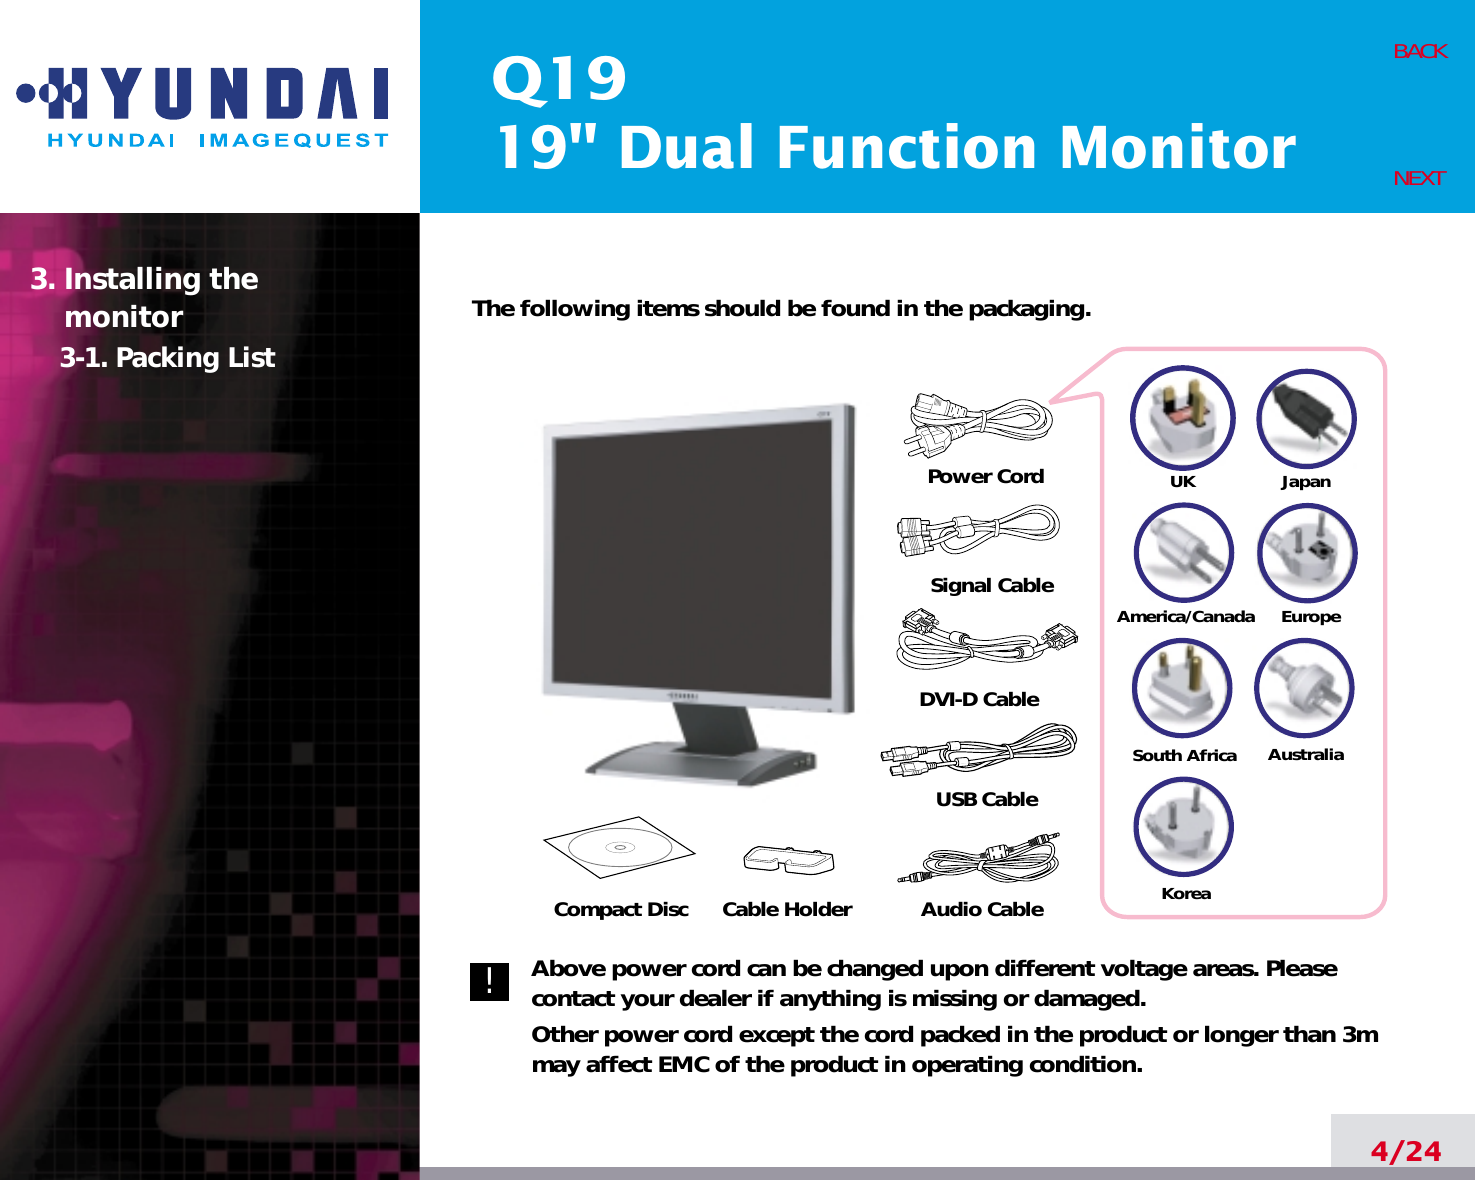 Q1919&quot; Dual Function Monitor4/24BACKNEXTThe following items should be found in the packaging.Above power cord can be changed upon different voltage areas. Pleasecontact your dealer if anything is missing or damaged.Other power cord except the cord packed in the product or longer than 3mmay affect EMC of the product in operating condition.3. Installing the monitor3-1. Packing List!UKAmerica/CanadaJapanAustraliaKoreaEuropeSouth AfricaPower CordSignal CableDVI-D CableCompact Disc Cable Holder Audio Cable USB Cable